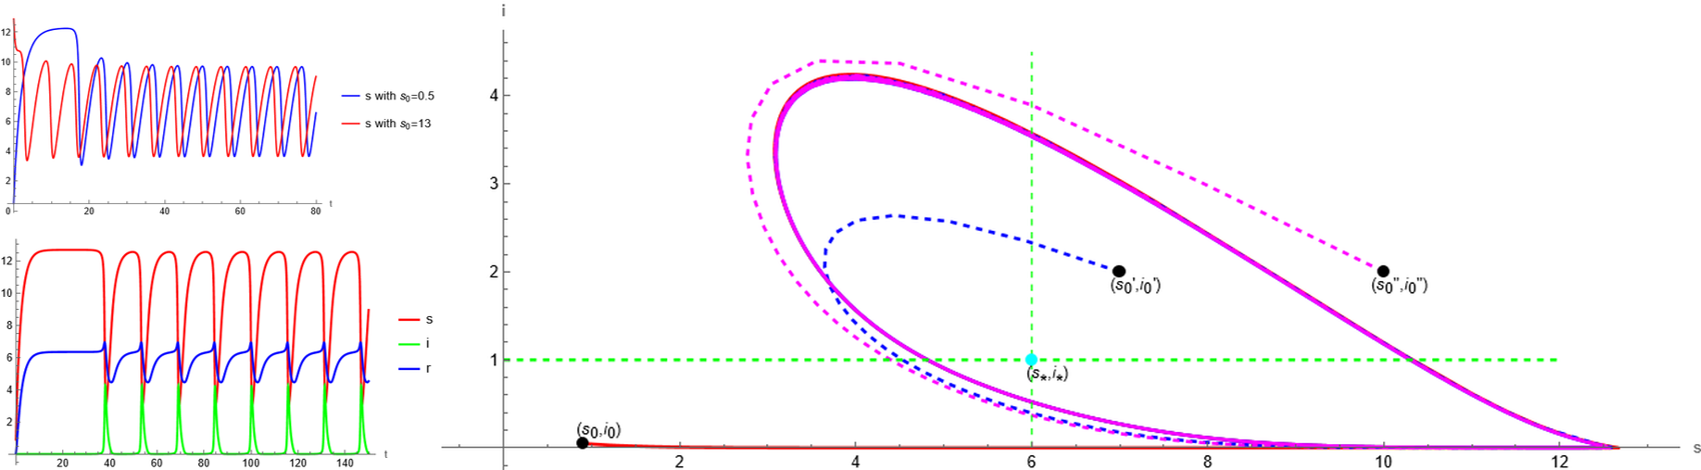 Finding bifurcations in mathematical epidemiology via reaction network methods: confirmed numerically that there exists a stable limit cycle around the equilibrium